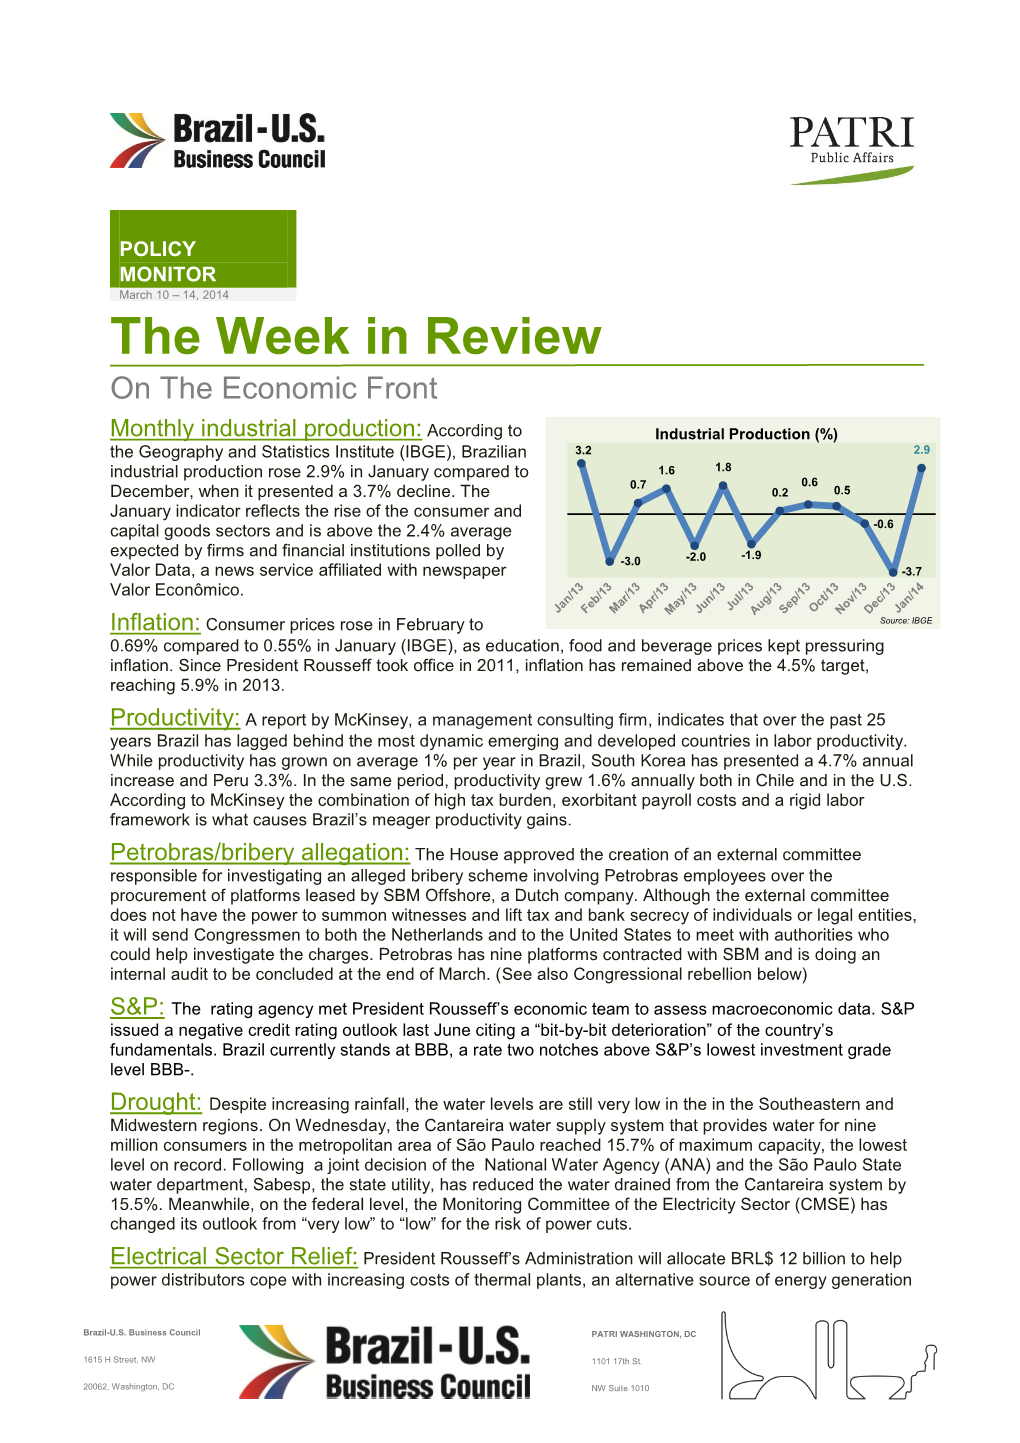 The Week in Review on the Economic Front